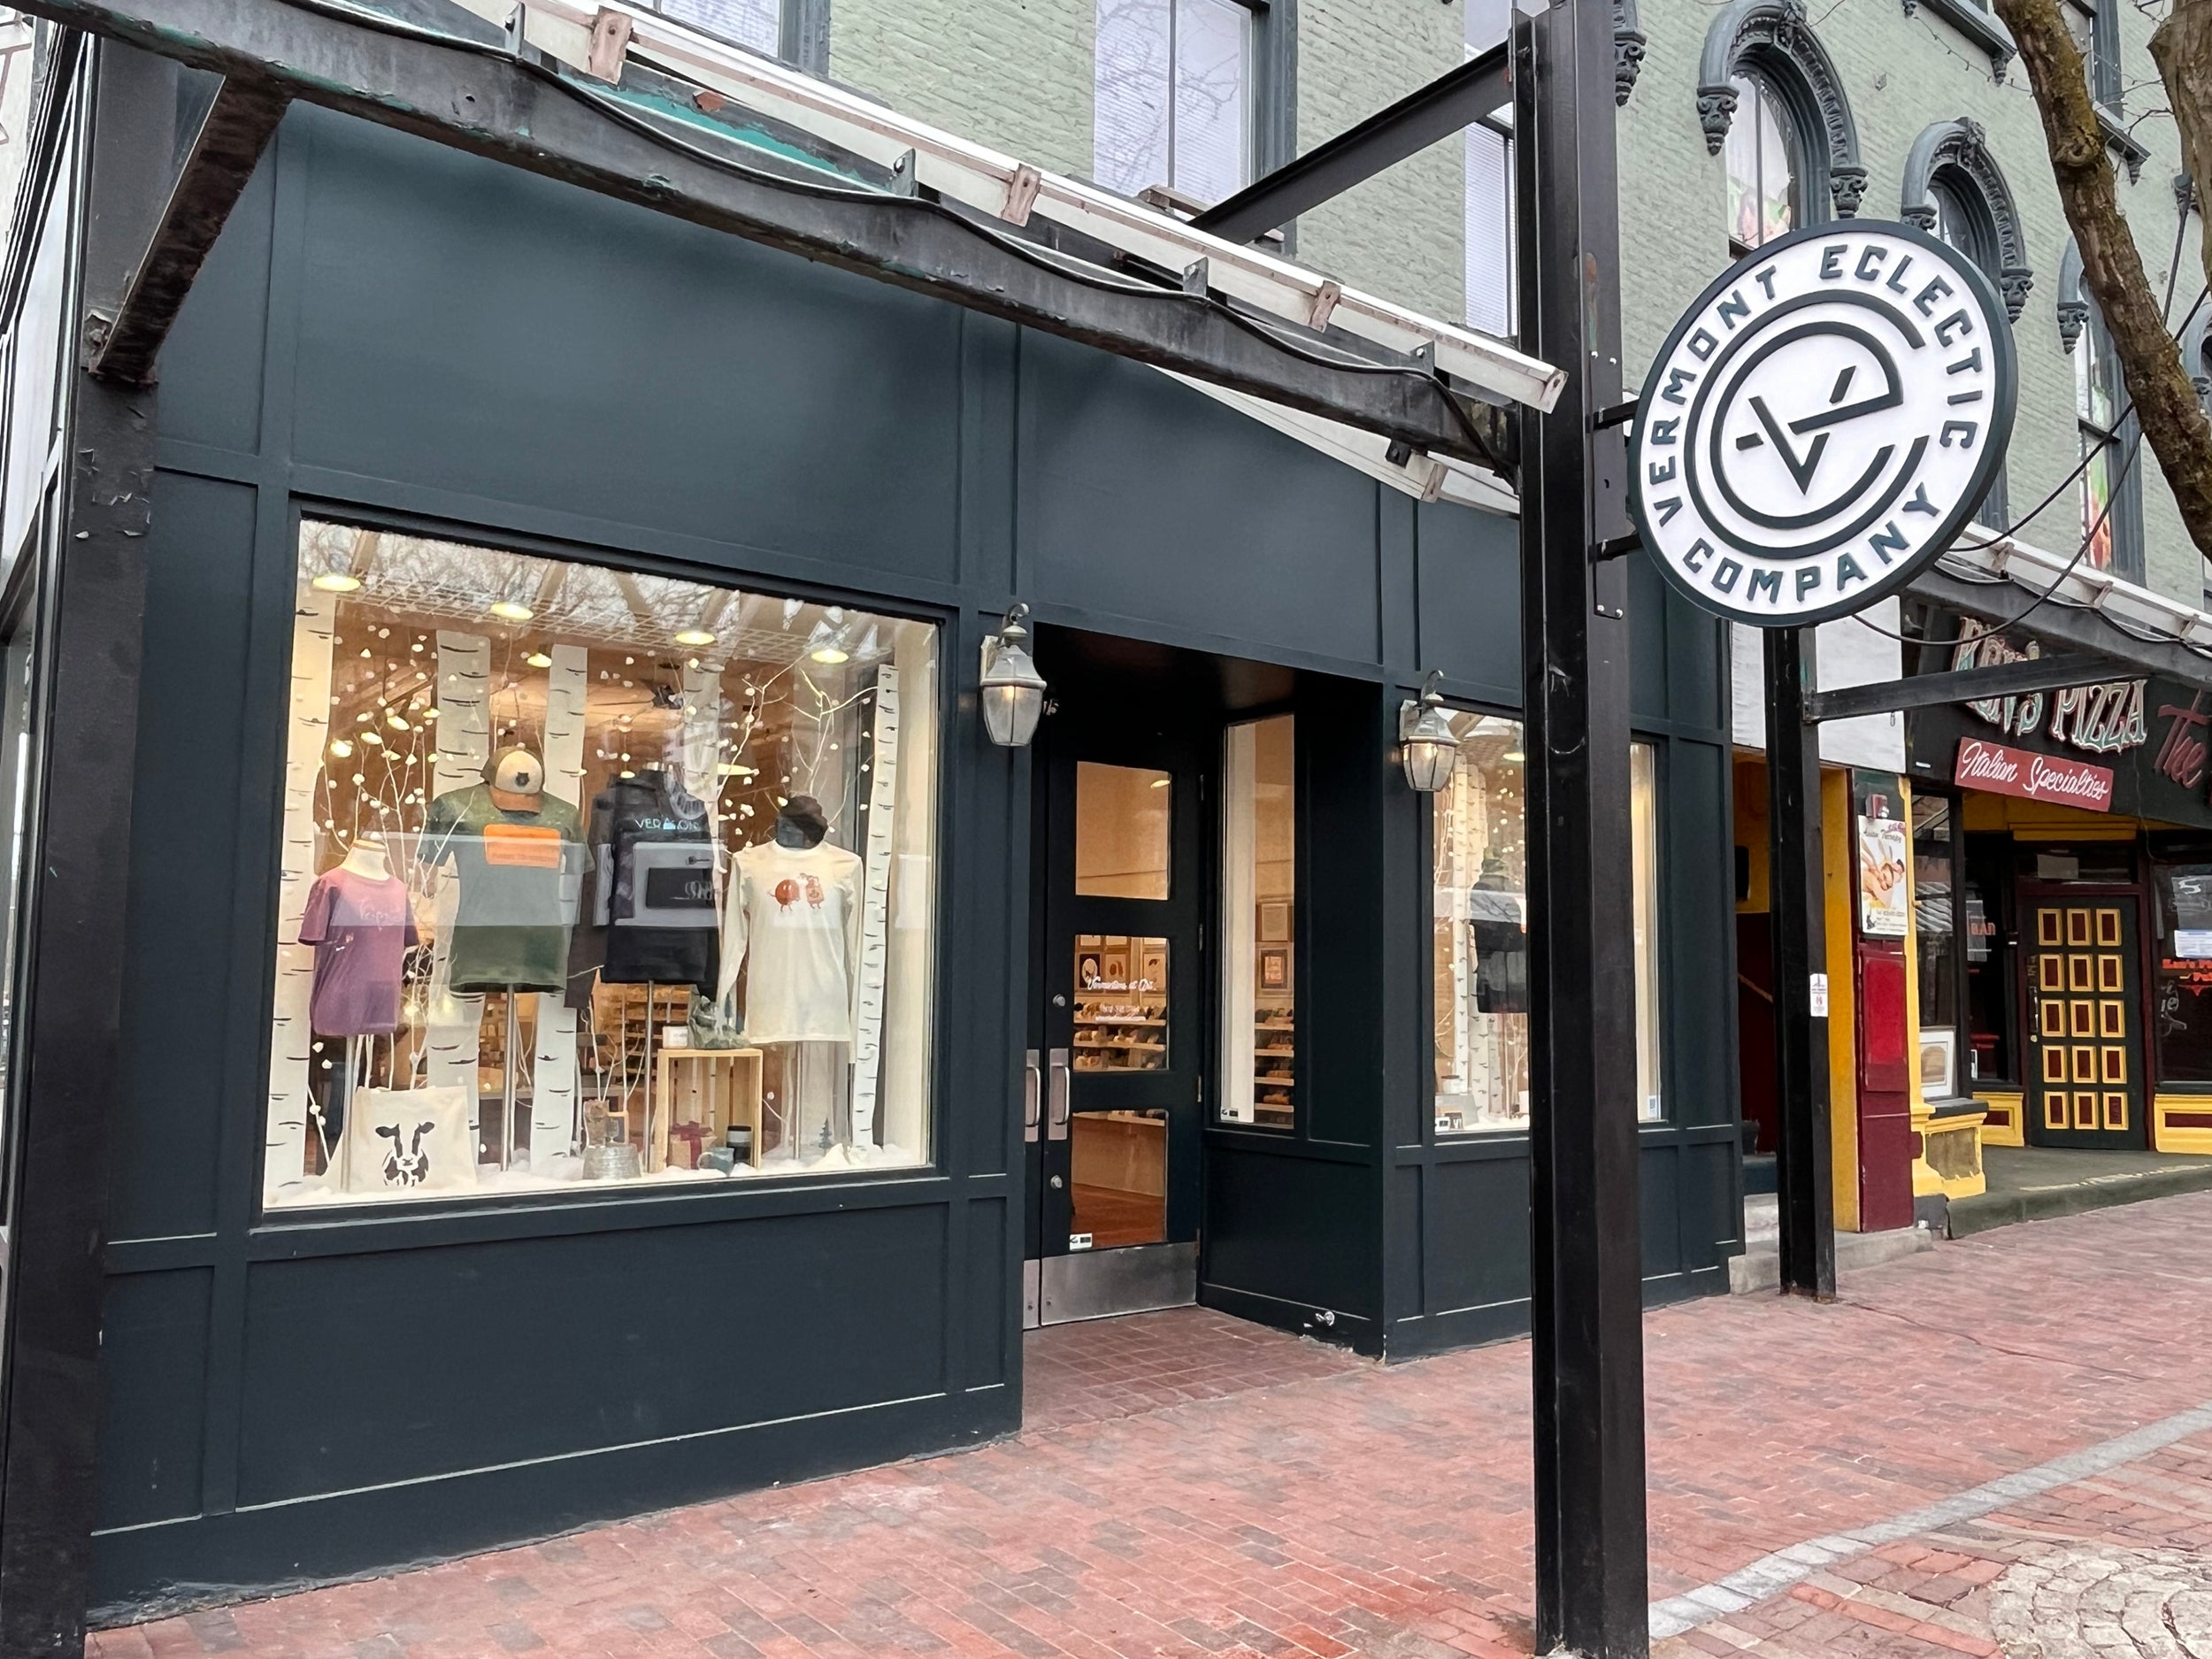 Exterior of Vermont Eclectic Store on Church Street in Burlington, Vermont